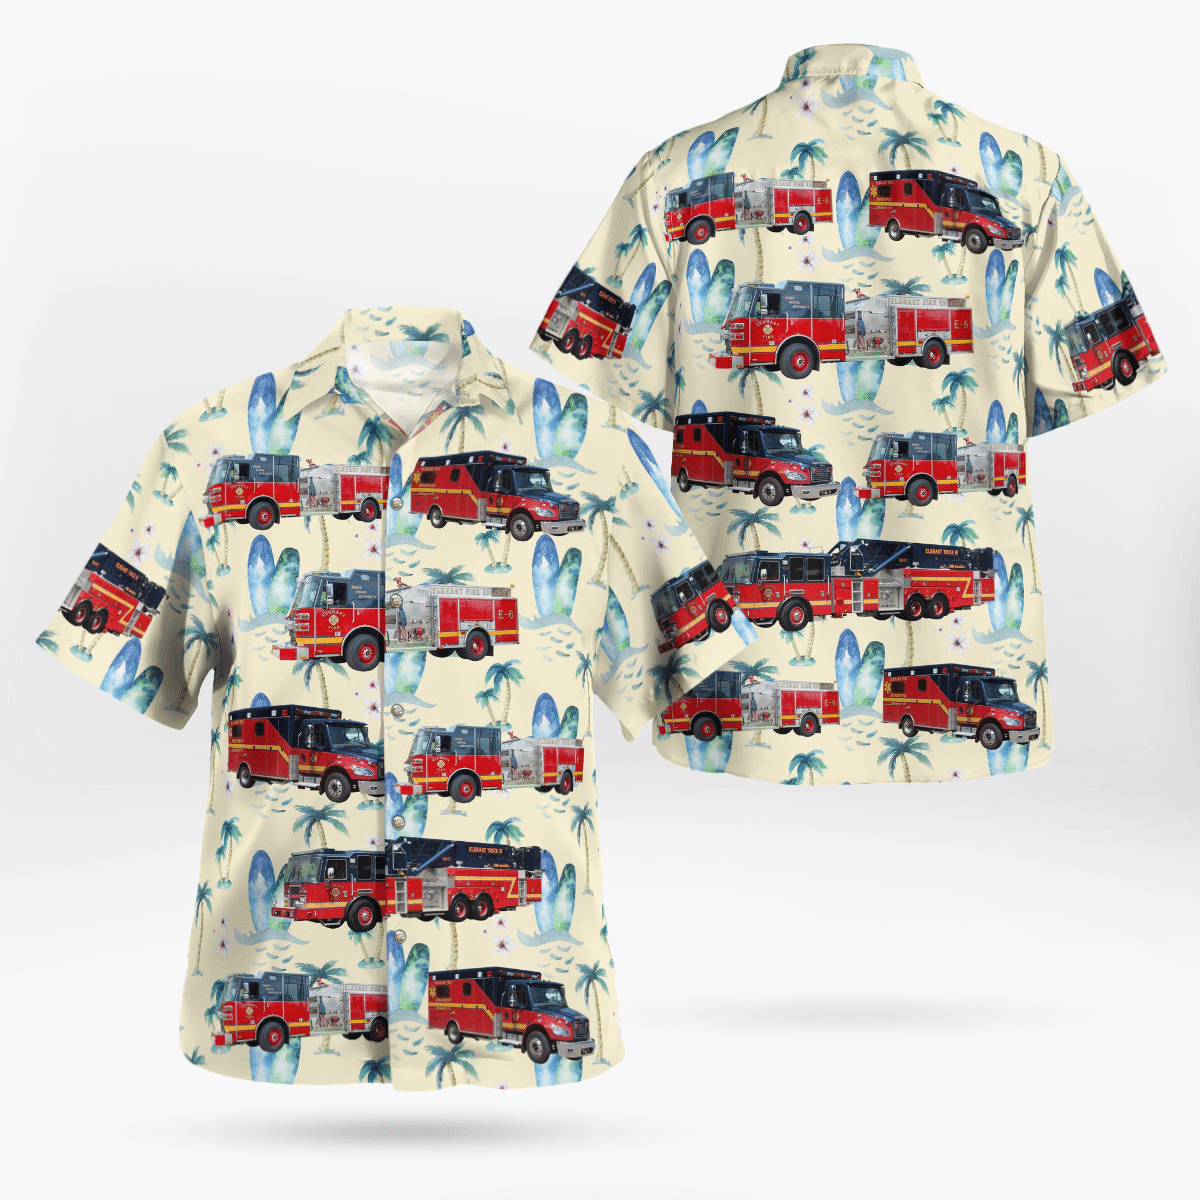 If you are in need of a new summertime look, pick up this Hawaiian shirt 80